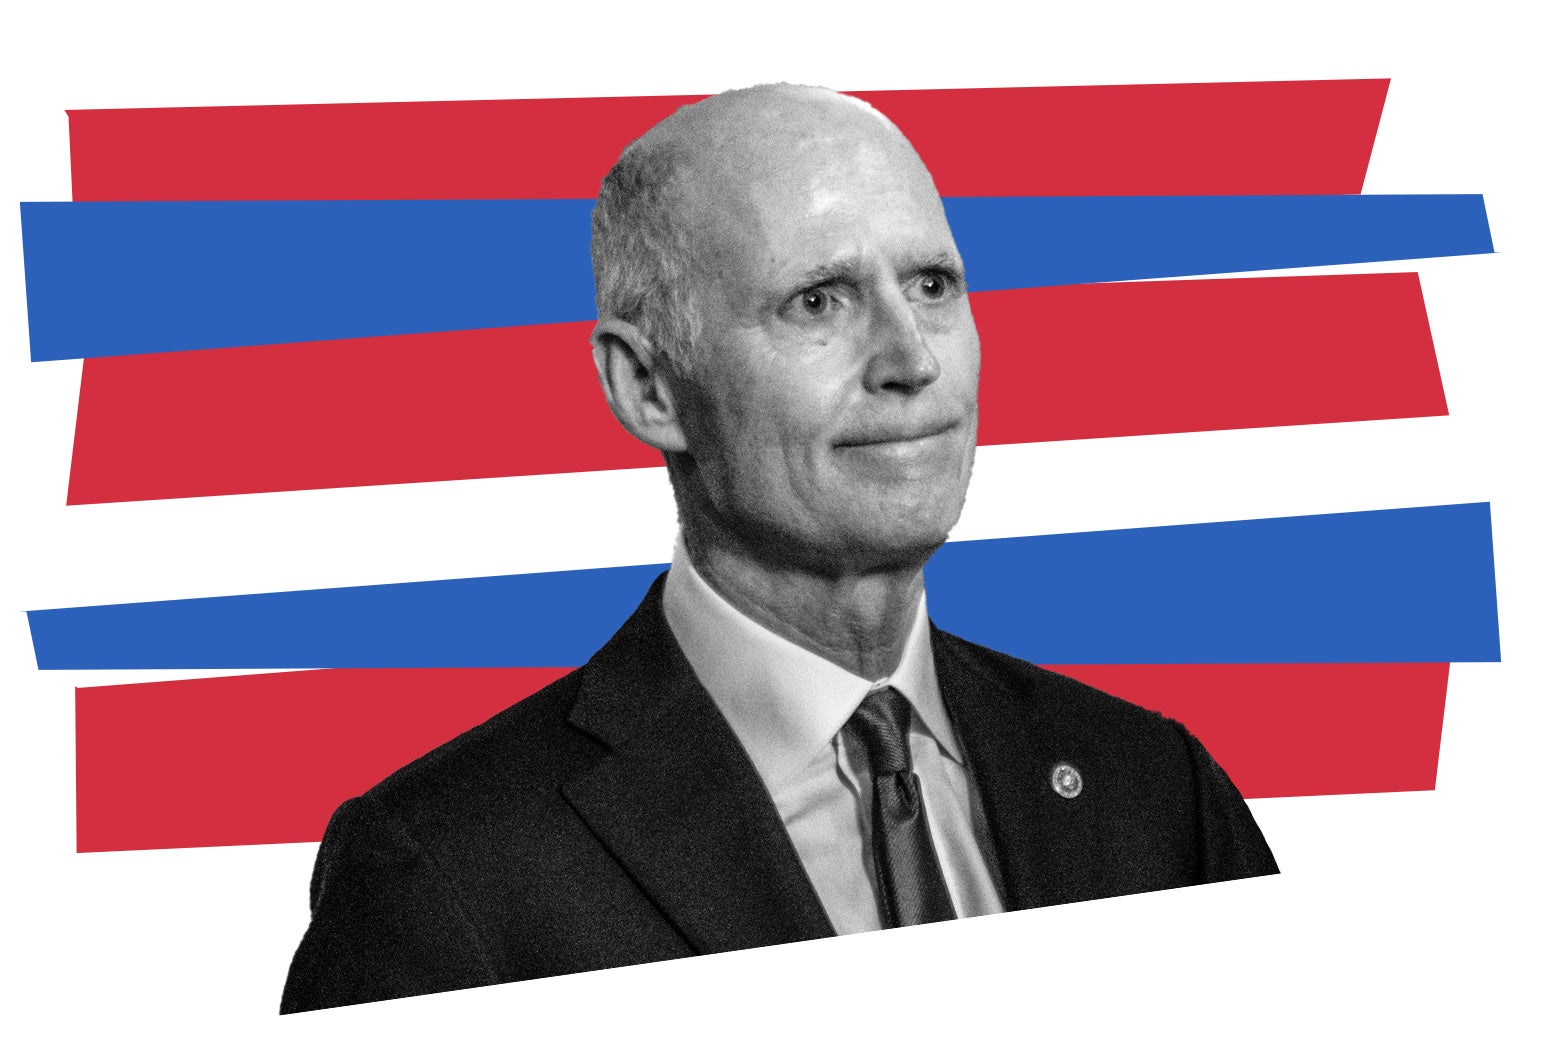 Rick Scott looking guilty, his lips pursed and mouth closed flat